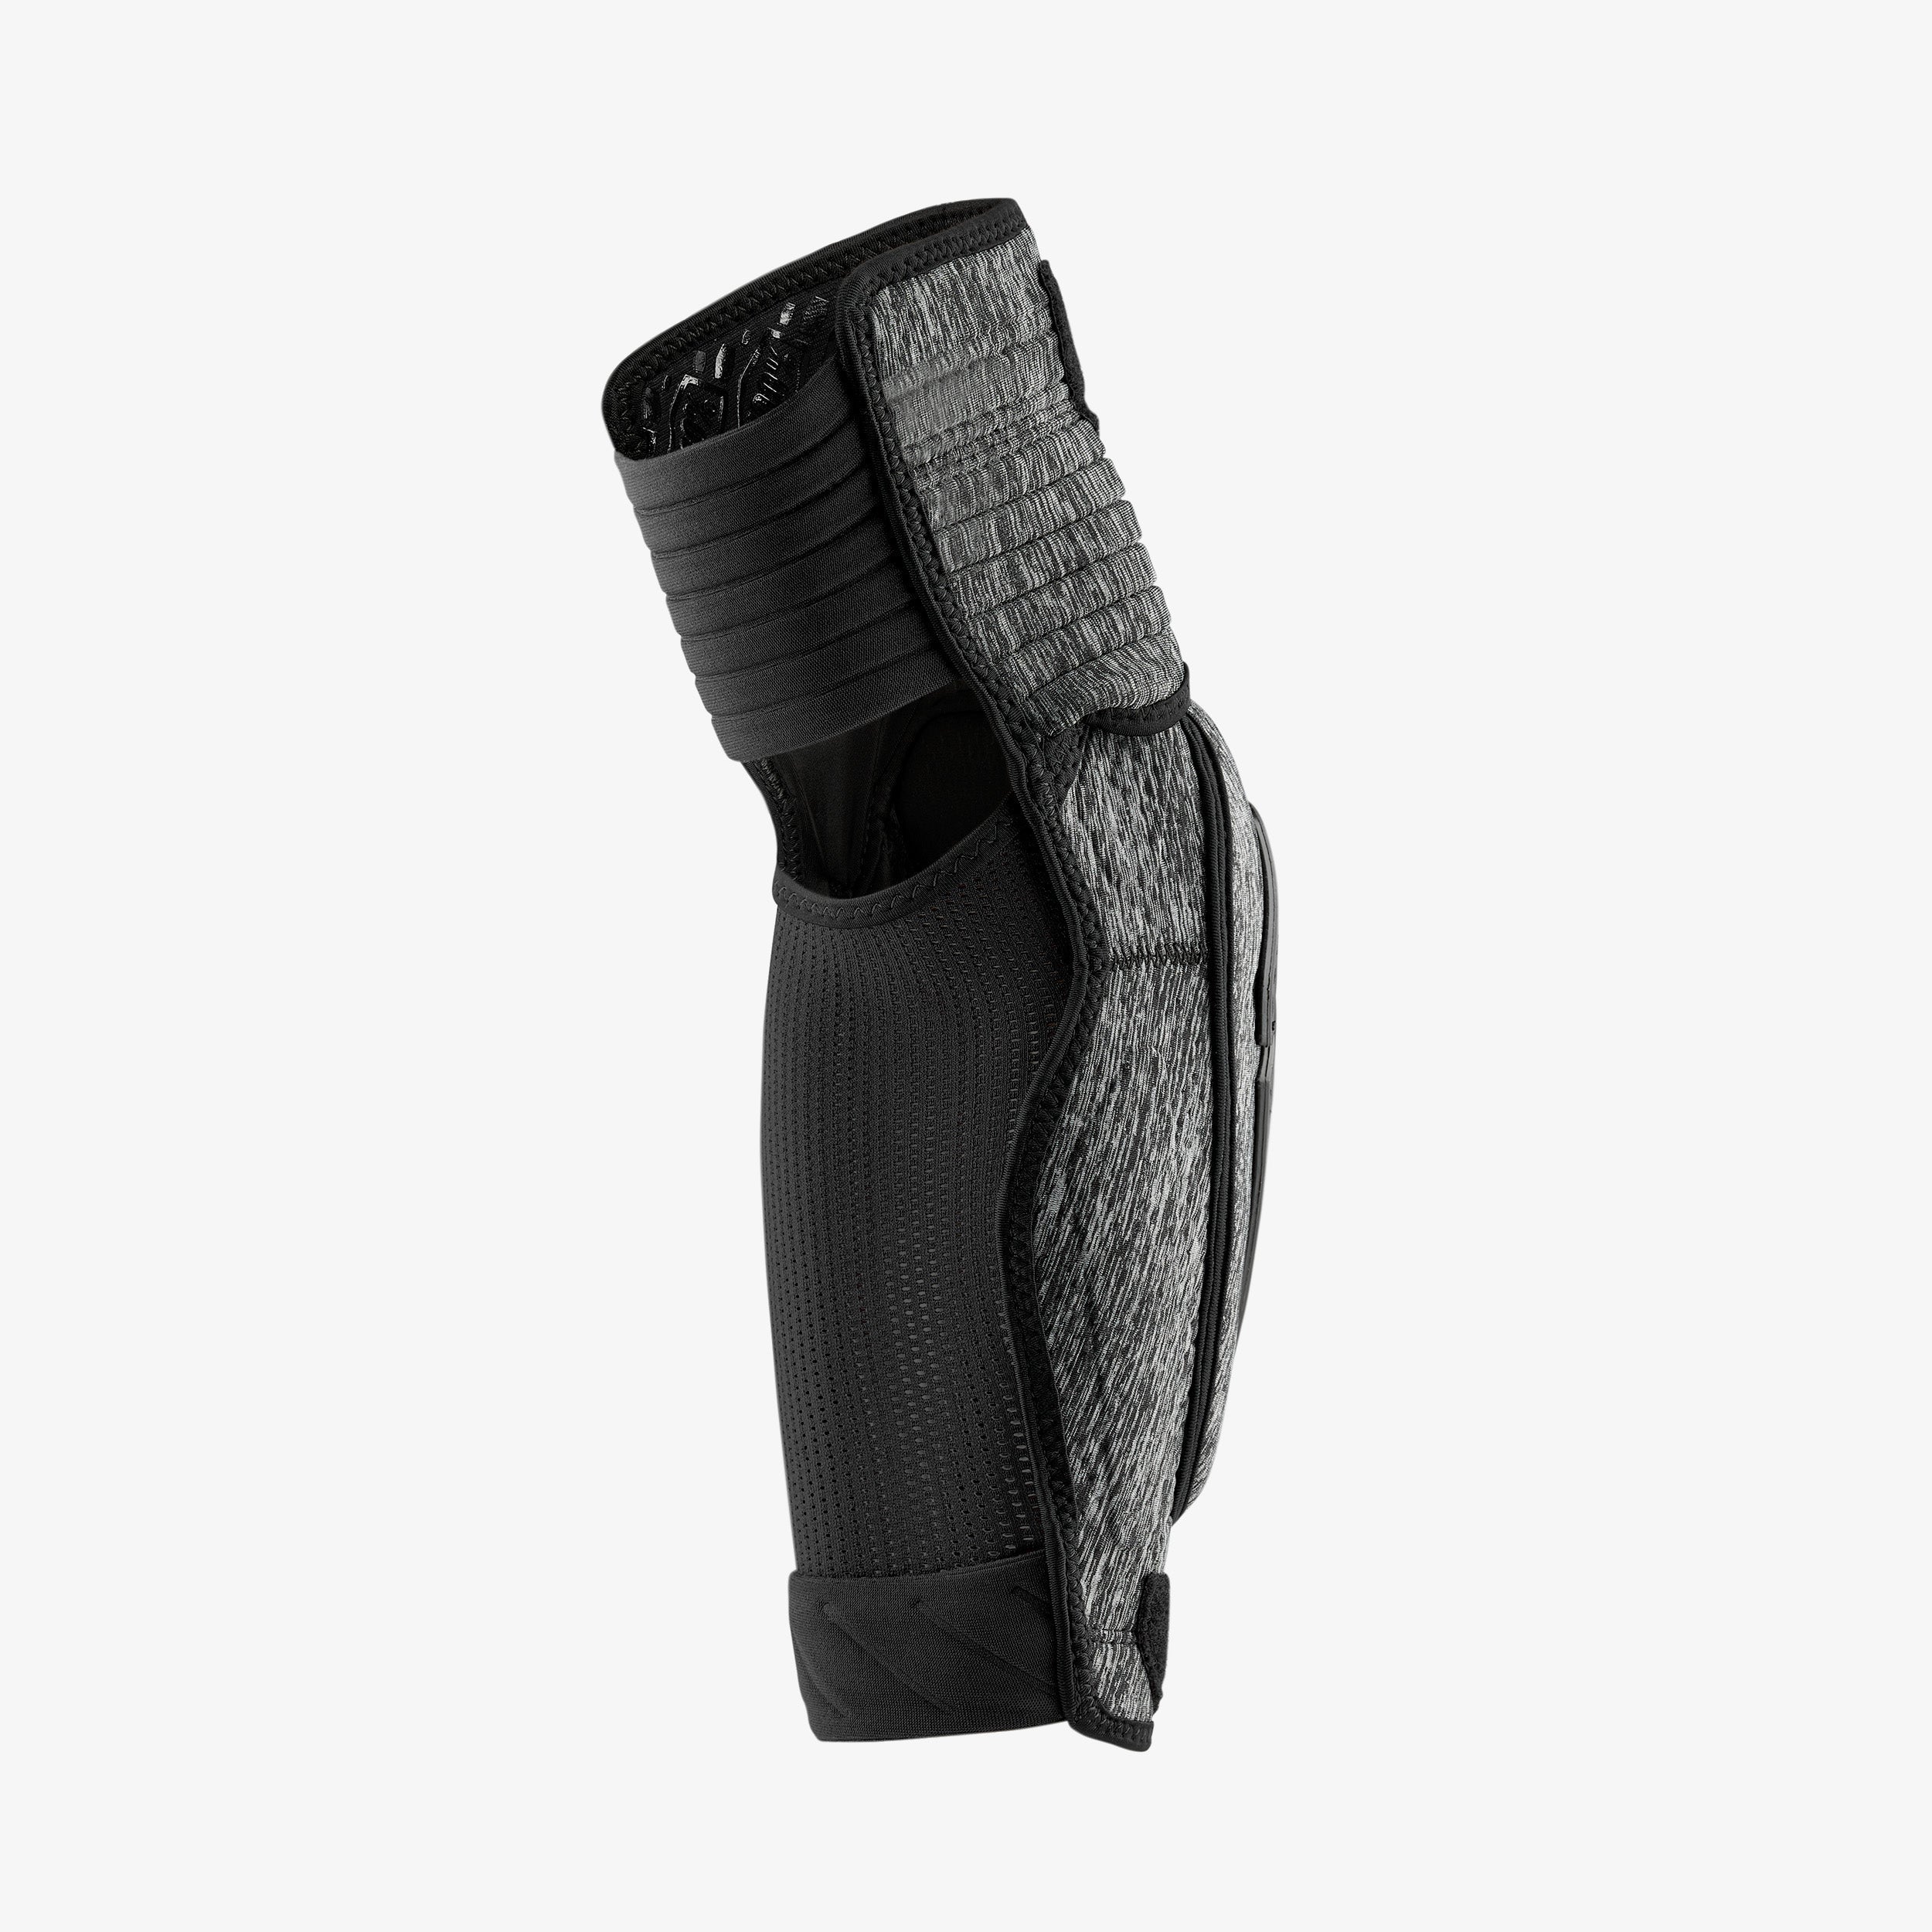 FORTIS Elbow Guards Heather Grey/Black - Secondary